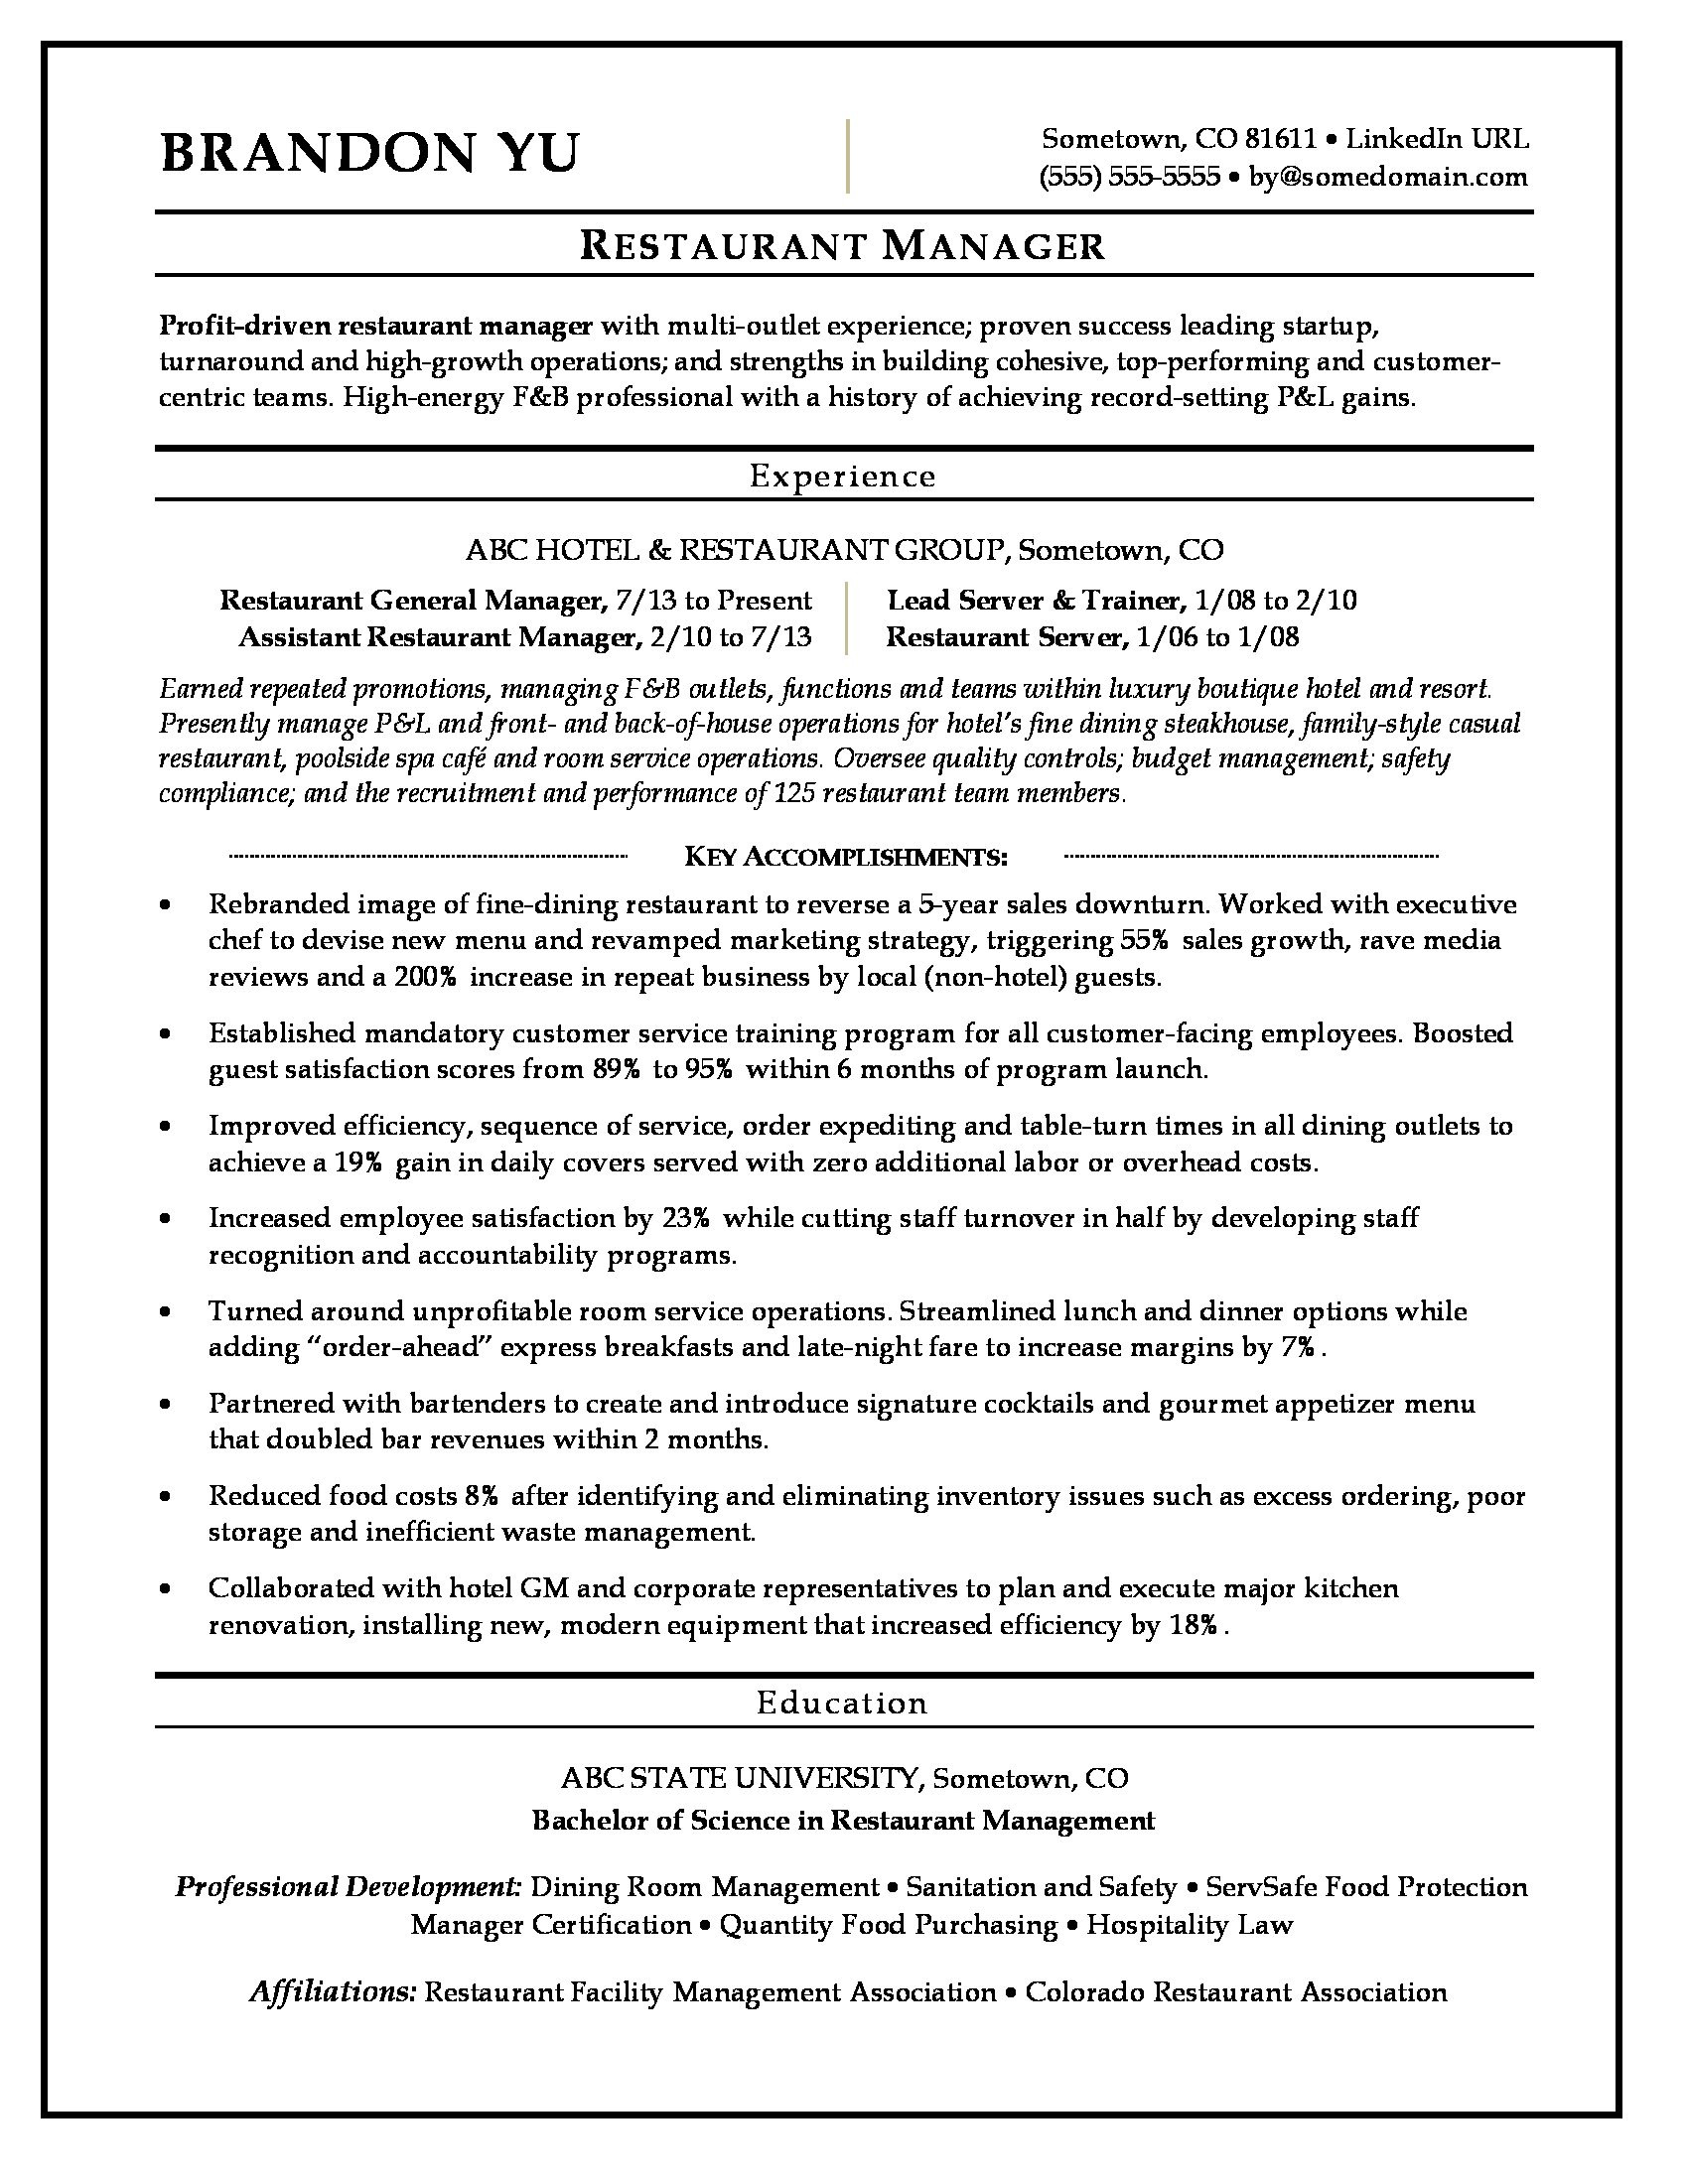 Sample Of Objectives In Resume for Hotel and Restaurant Management Restaurant Manager Resume Sample Monster.com